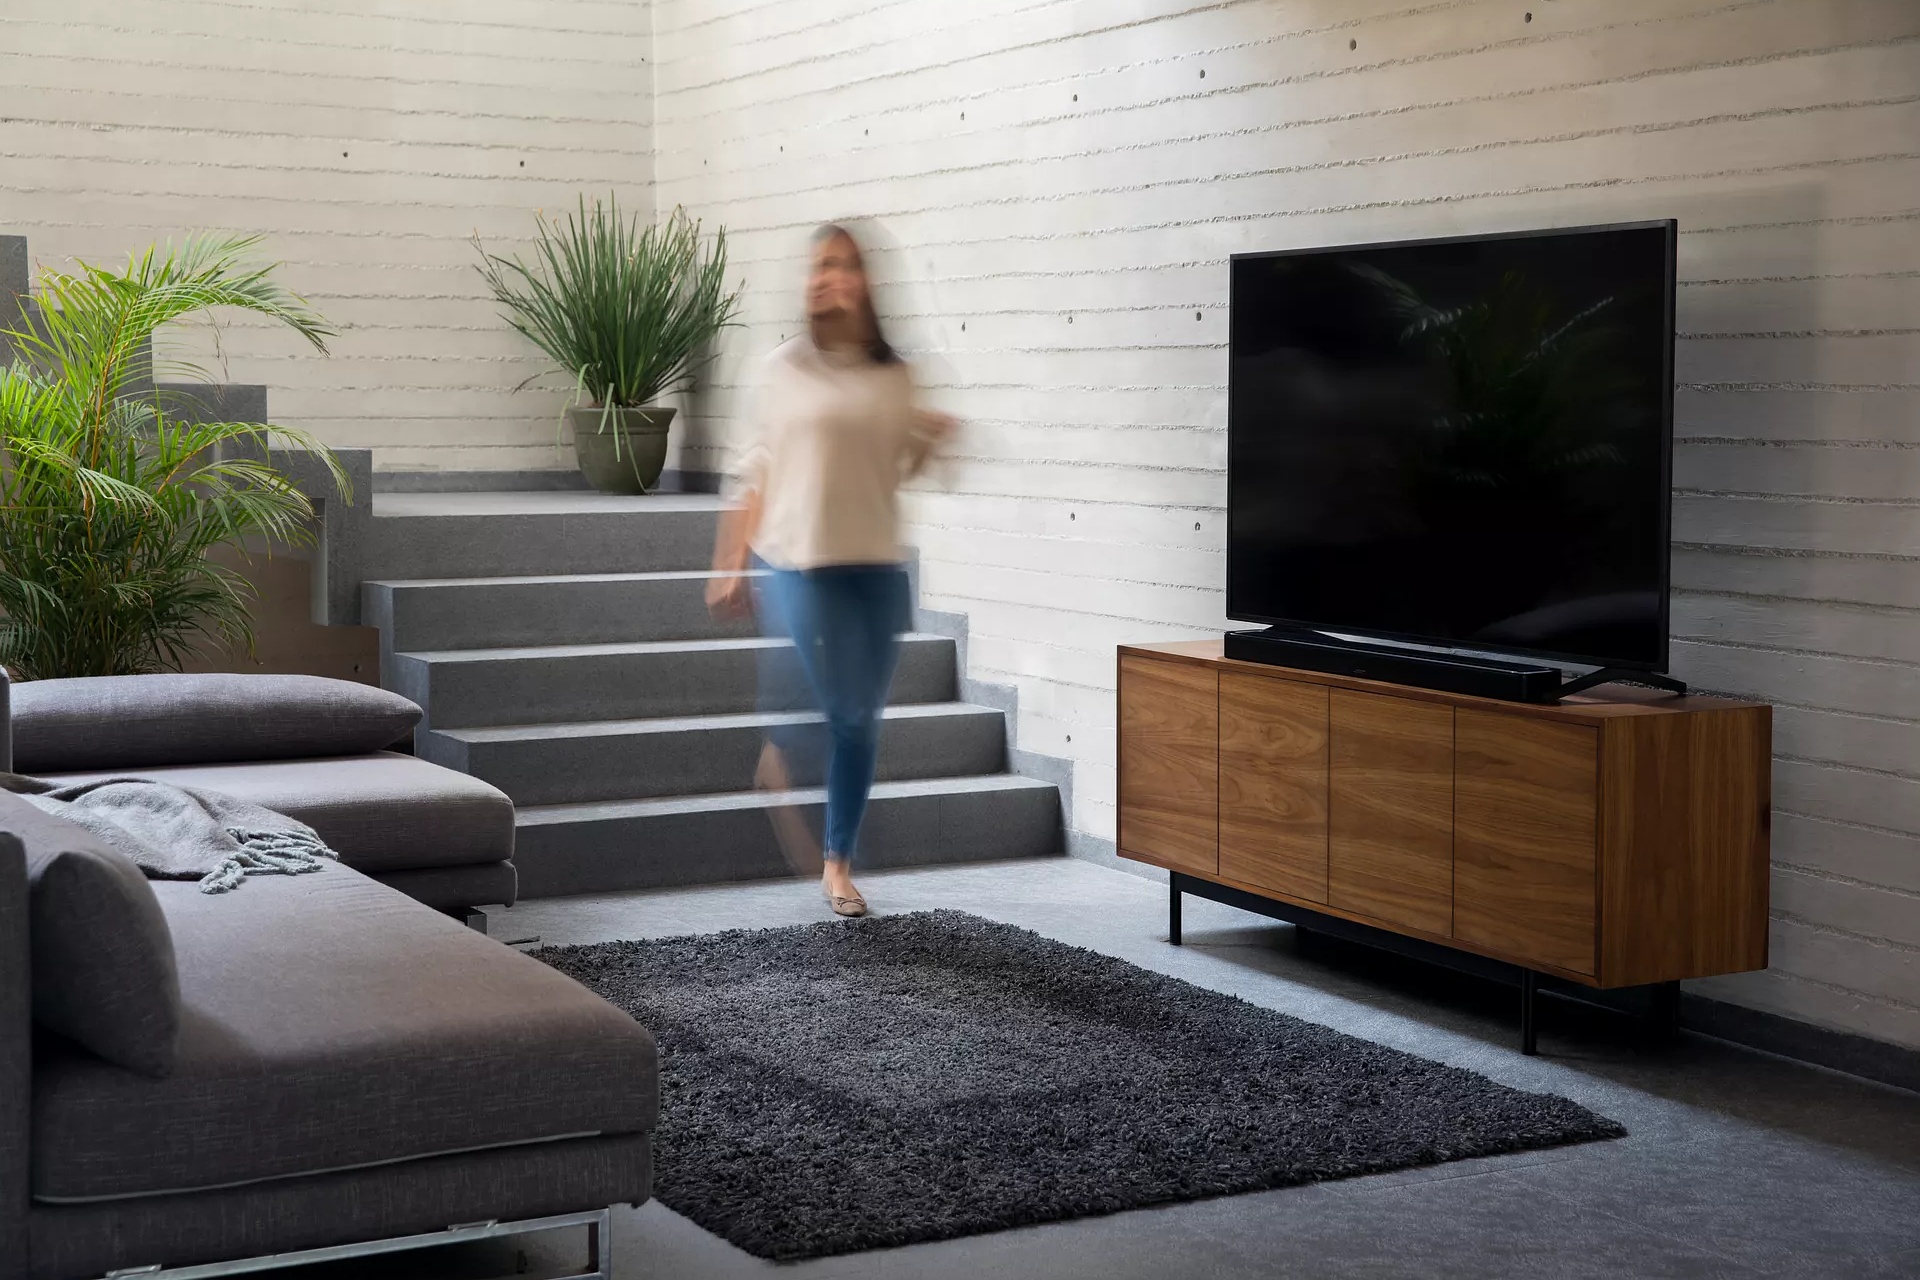 Woman walking downstairs into living as music plays from a Bose Soundbar